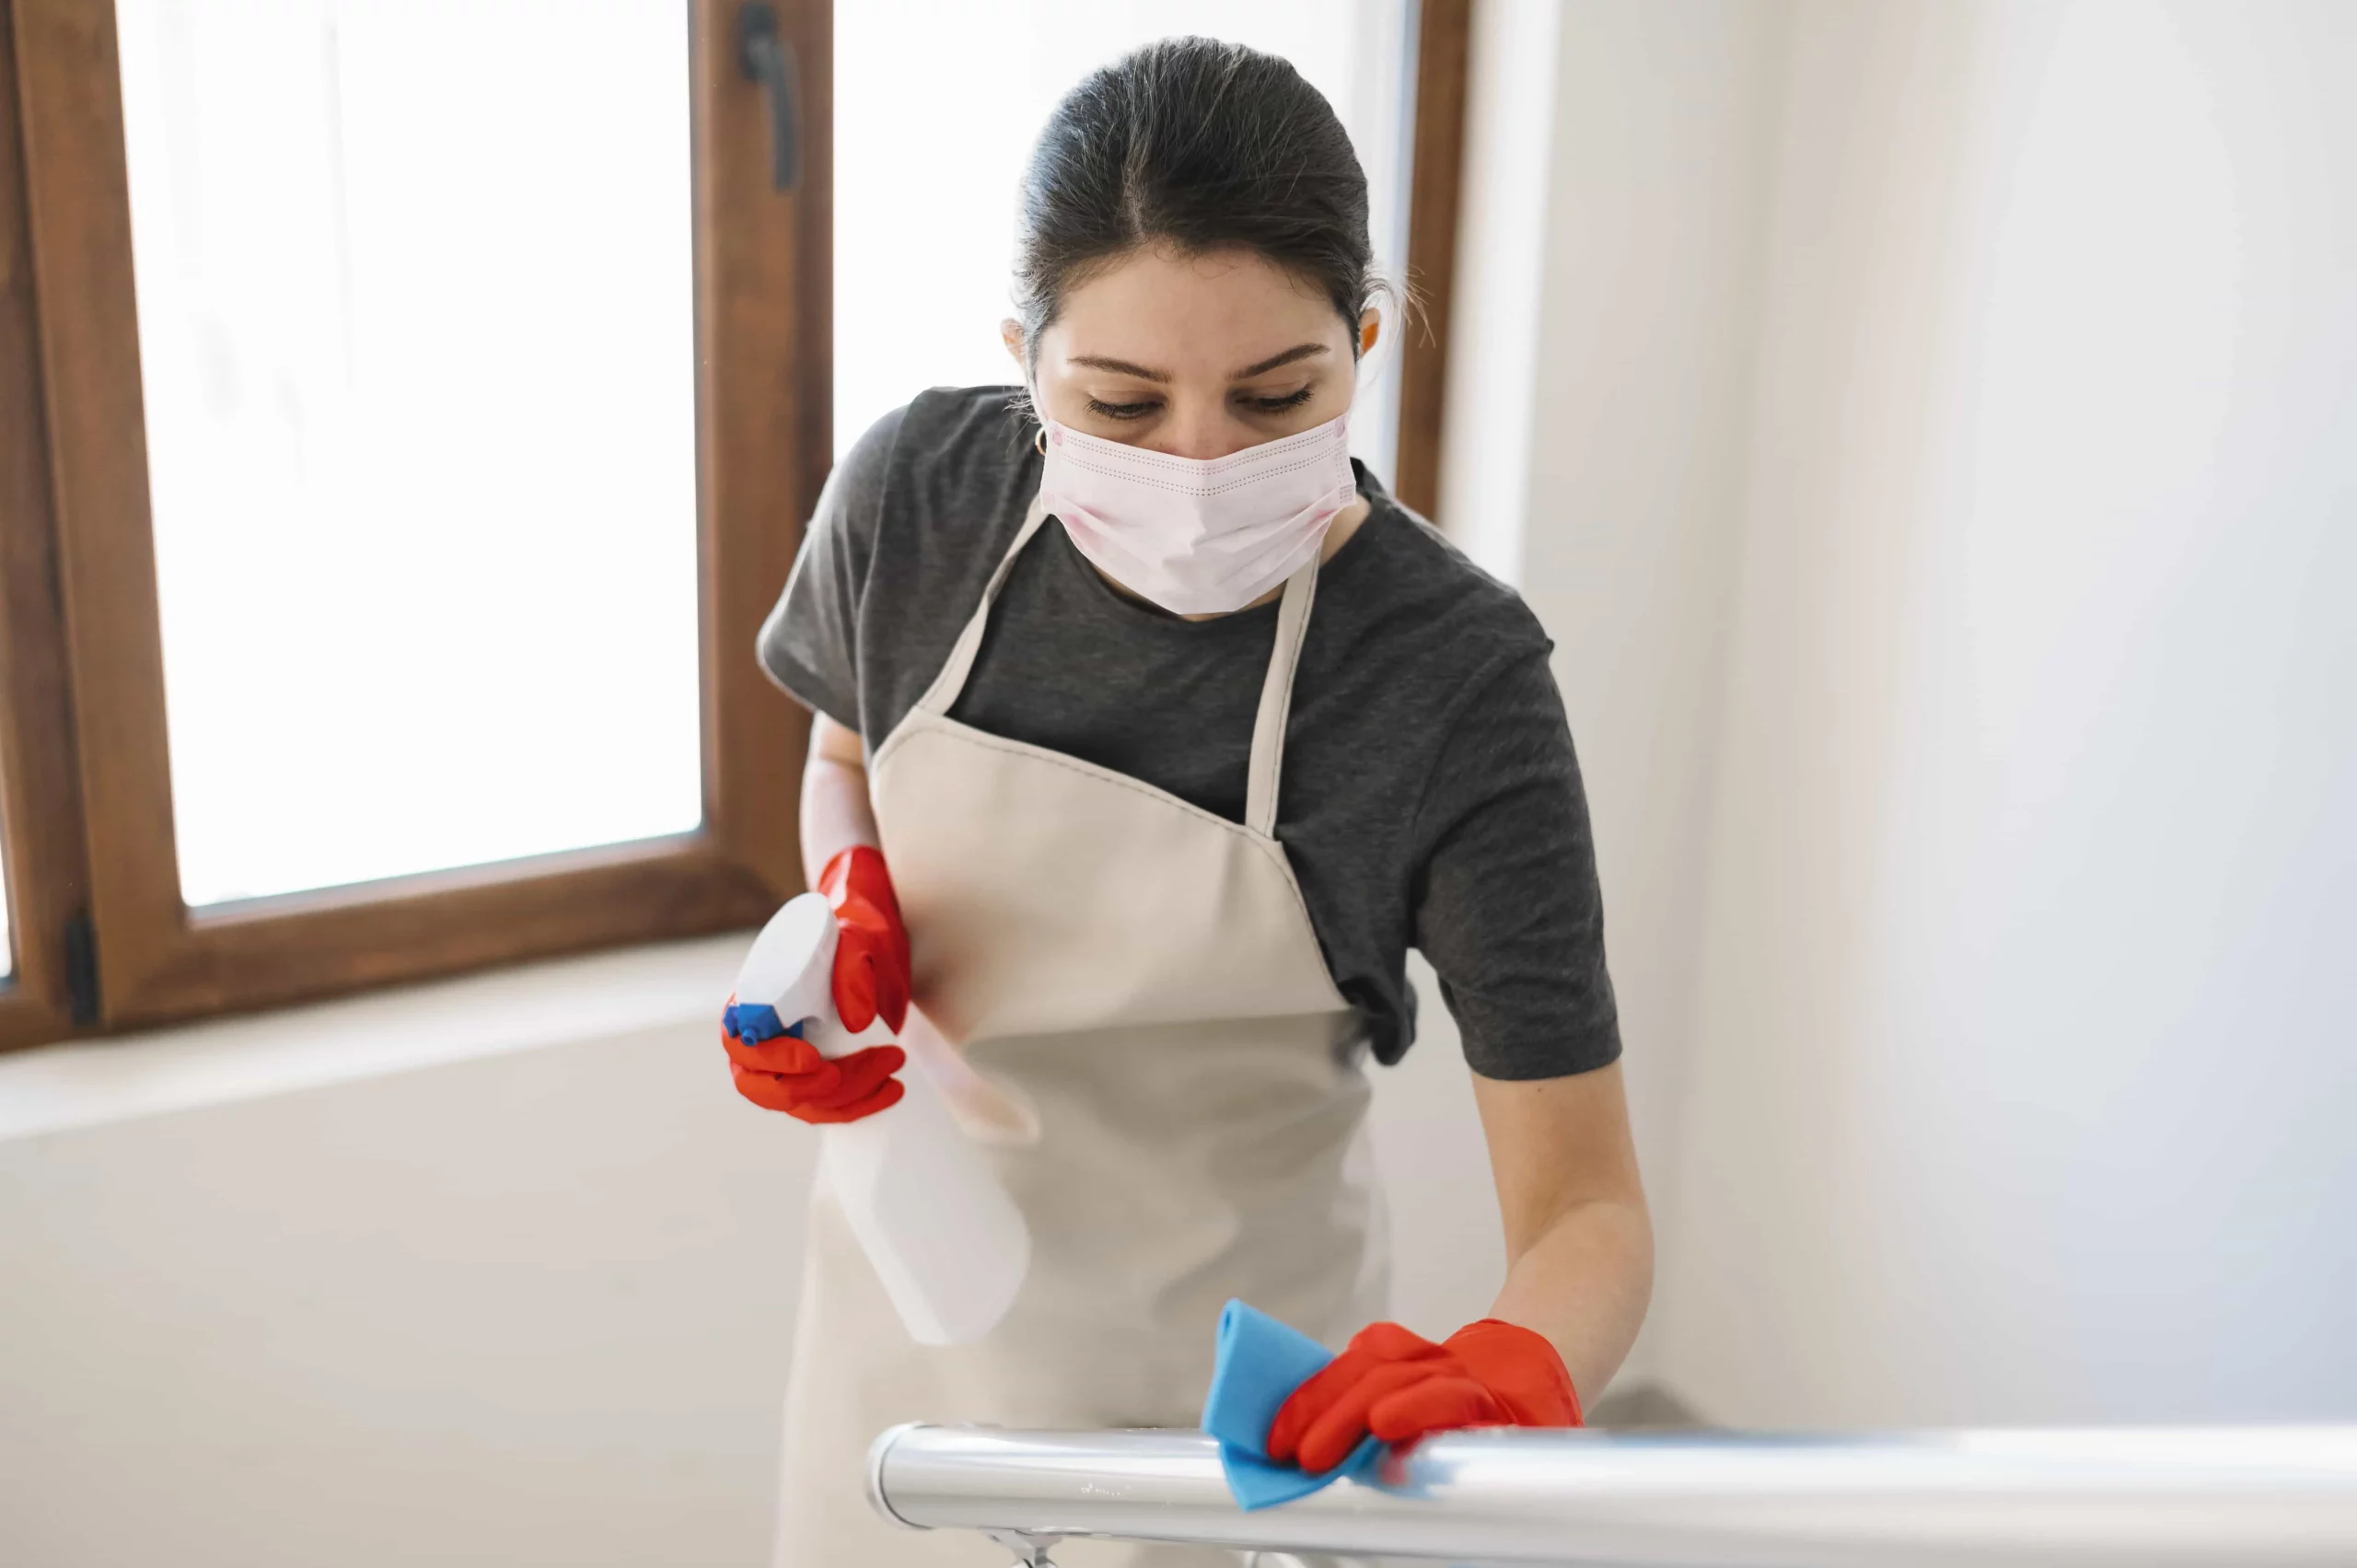 young cleaning lady wearing a mask and apron cleaning the staircases with a wipe